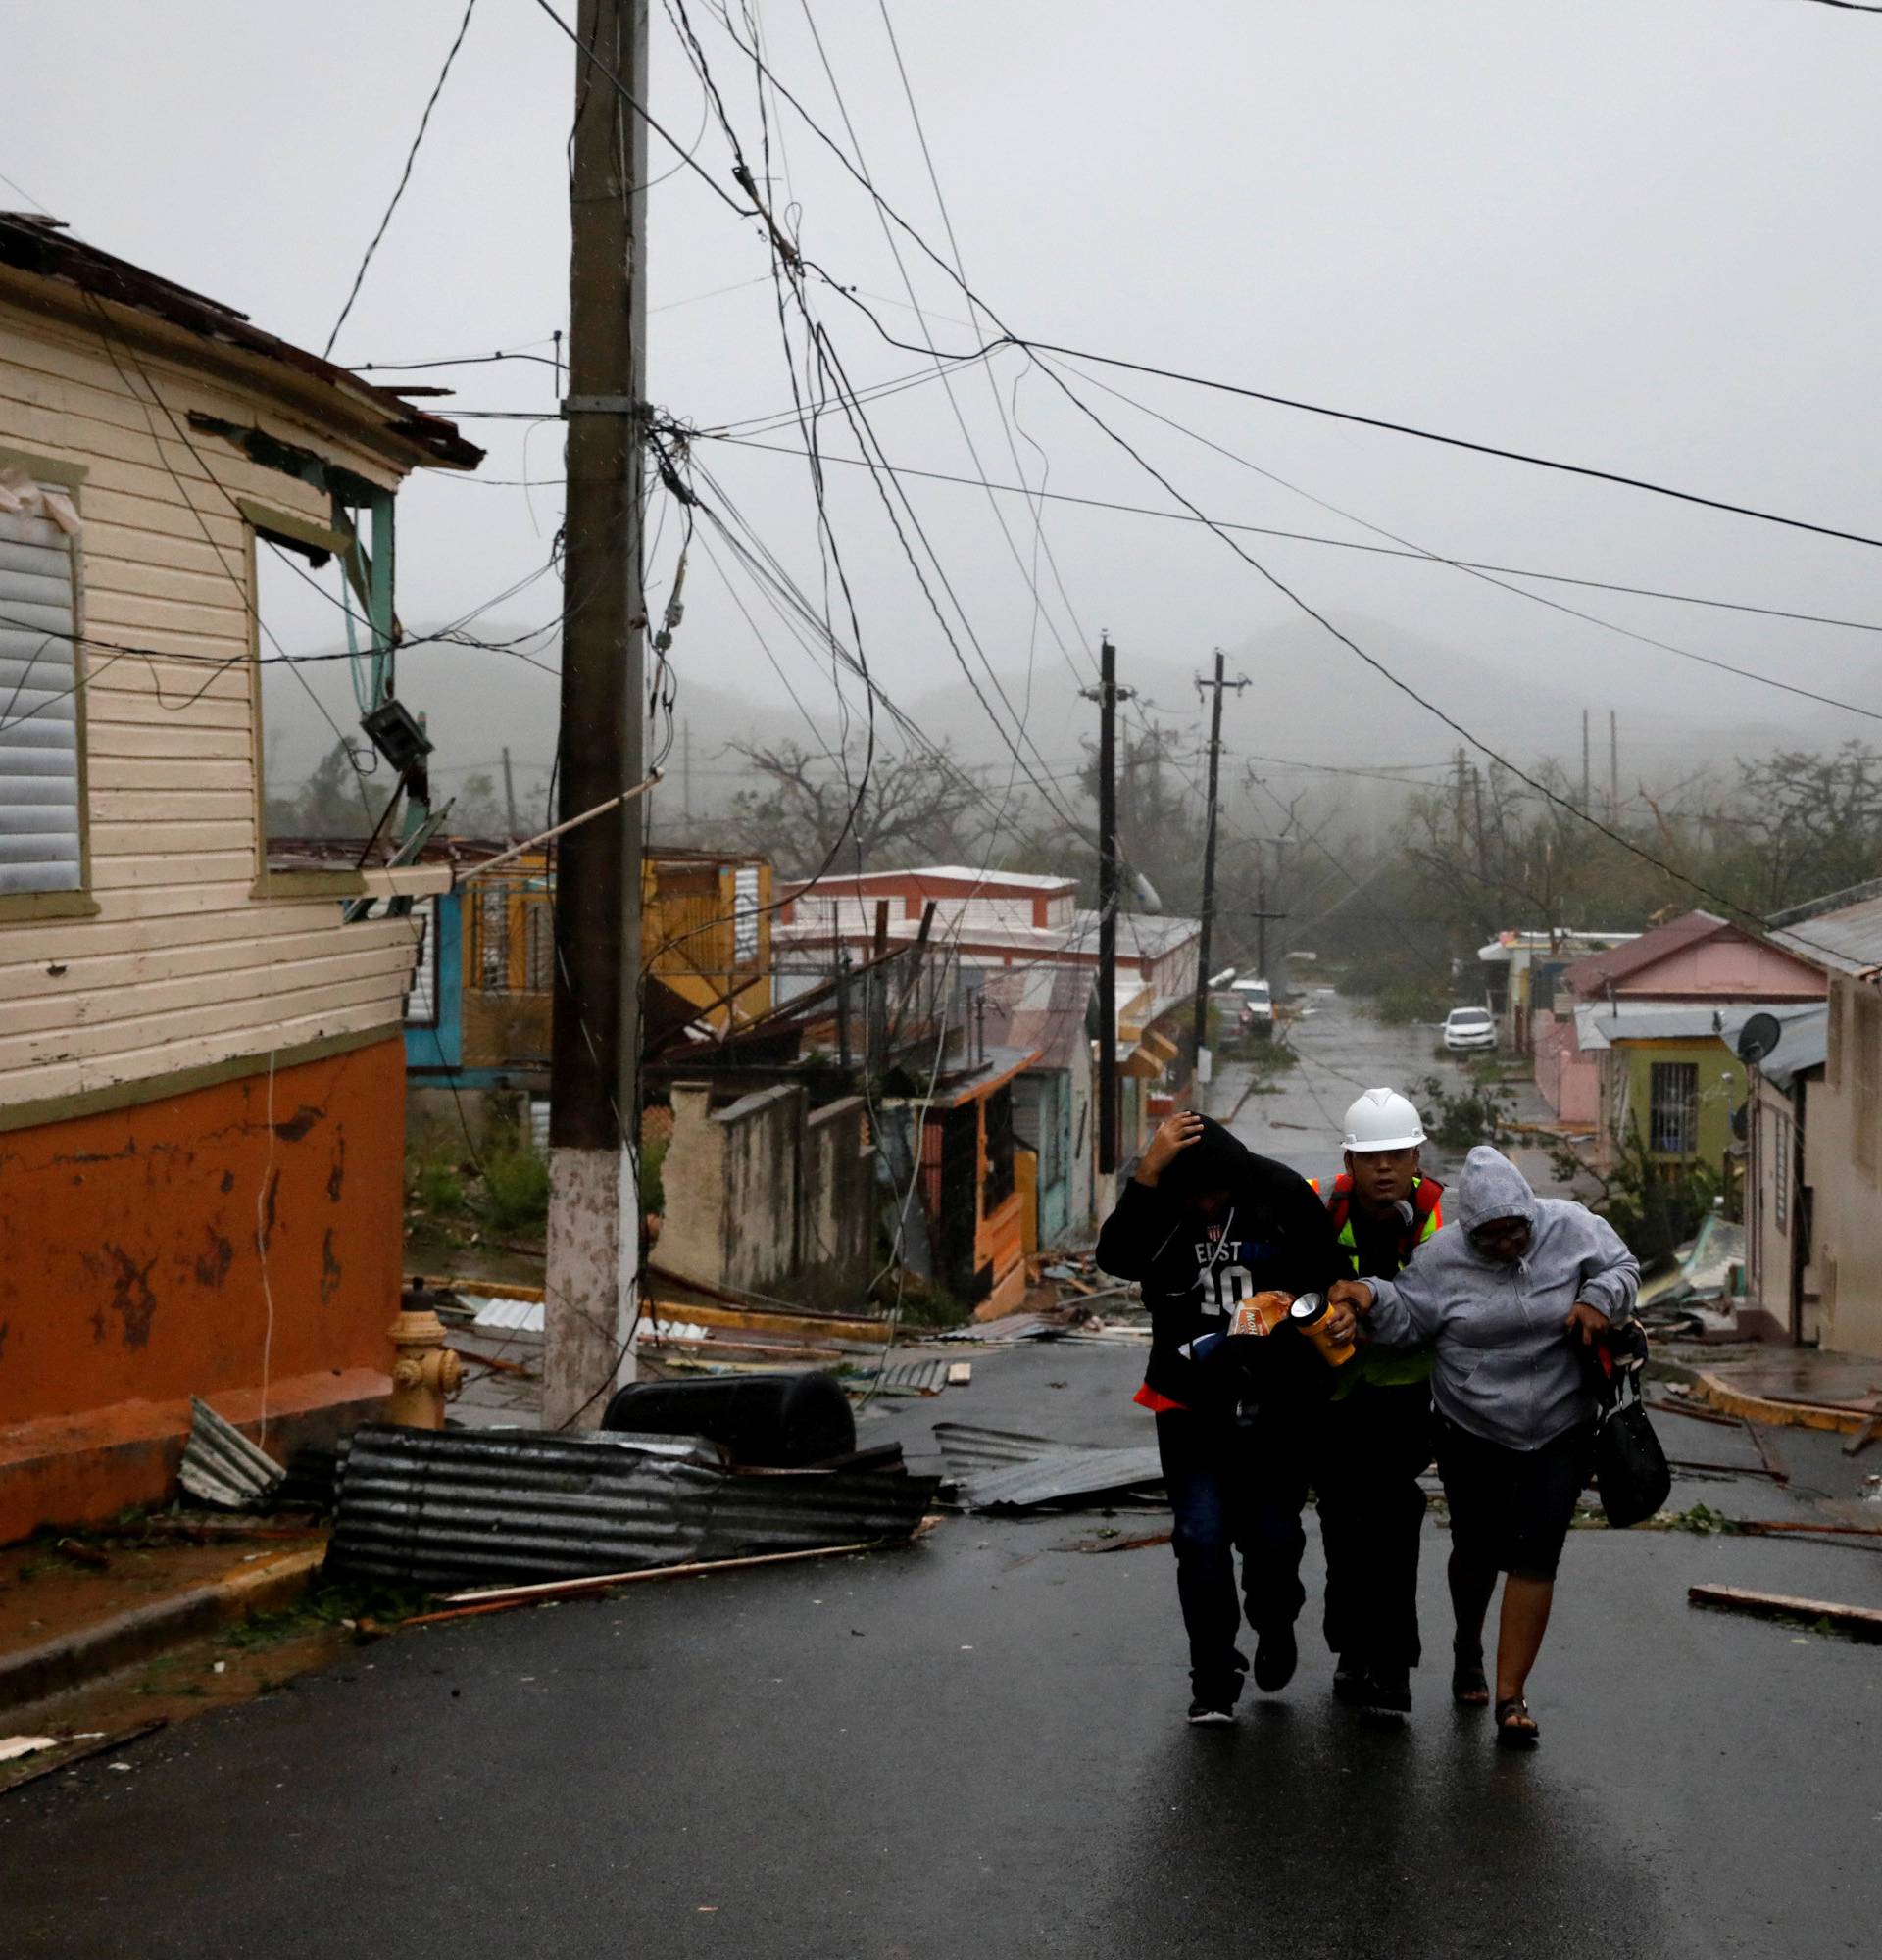 Rescue workers help people after the area was hit by Hurricane Maria in Guayama